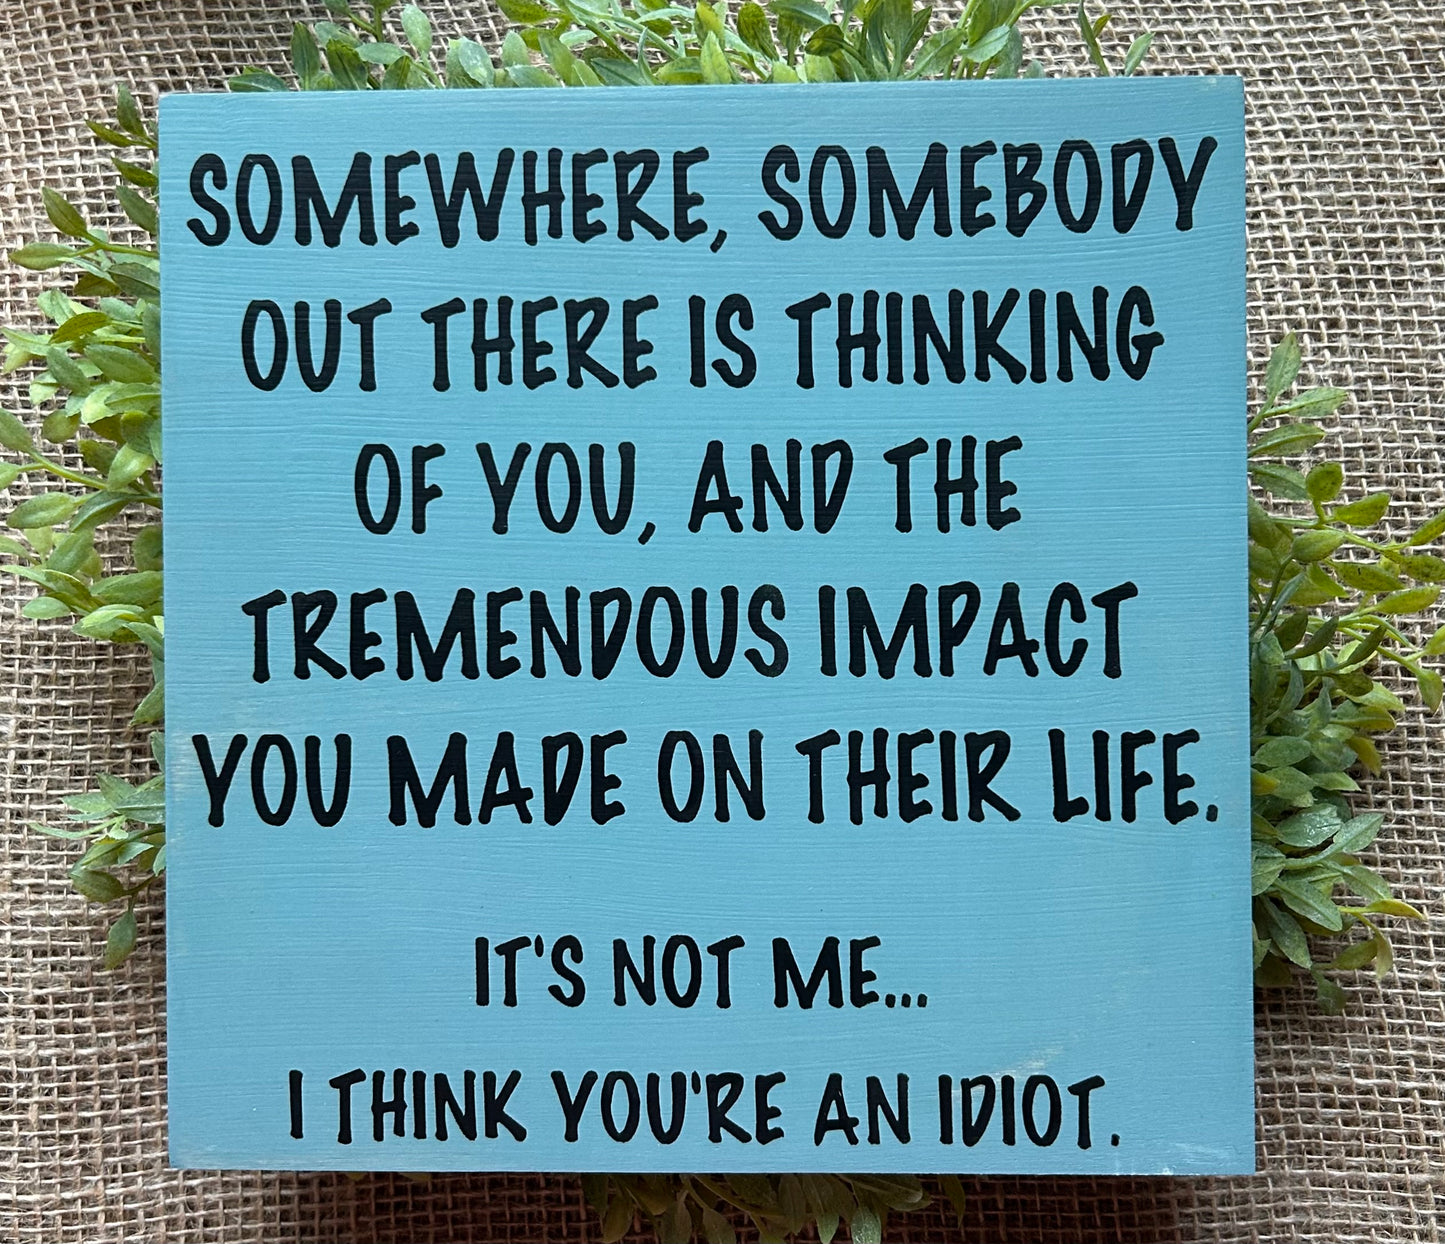 I Think You’re an Idiot - Funny Rustic Wood Sign